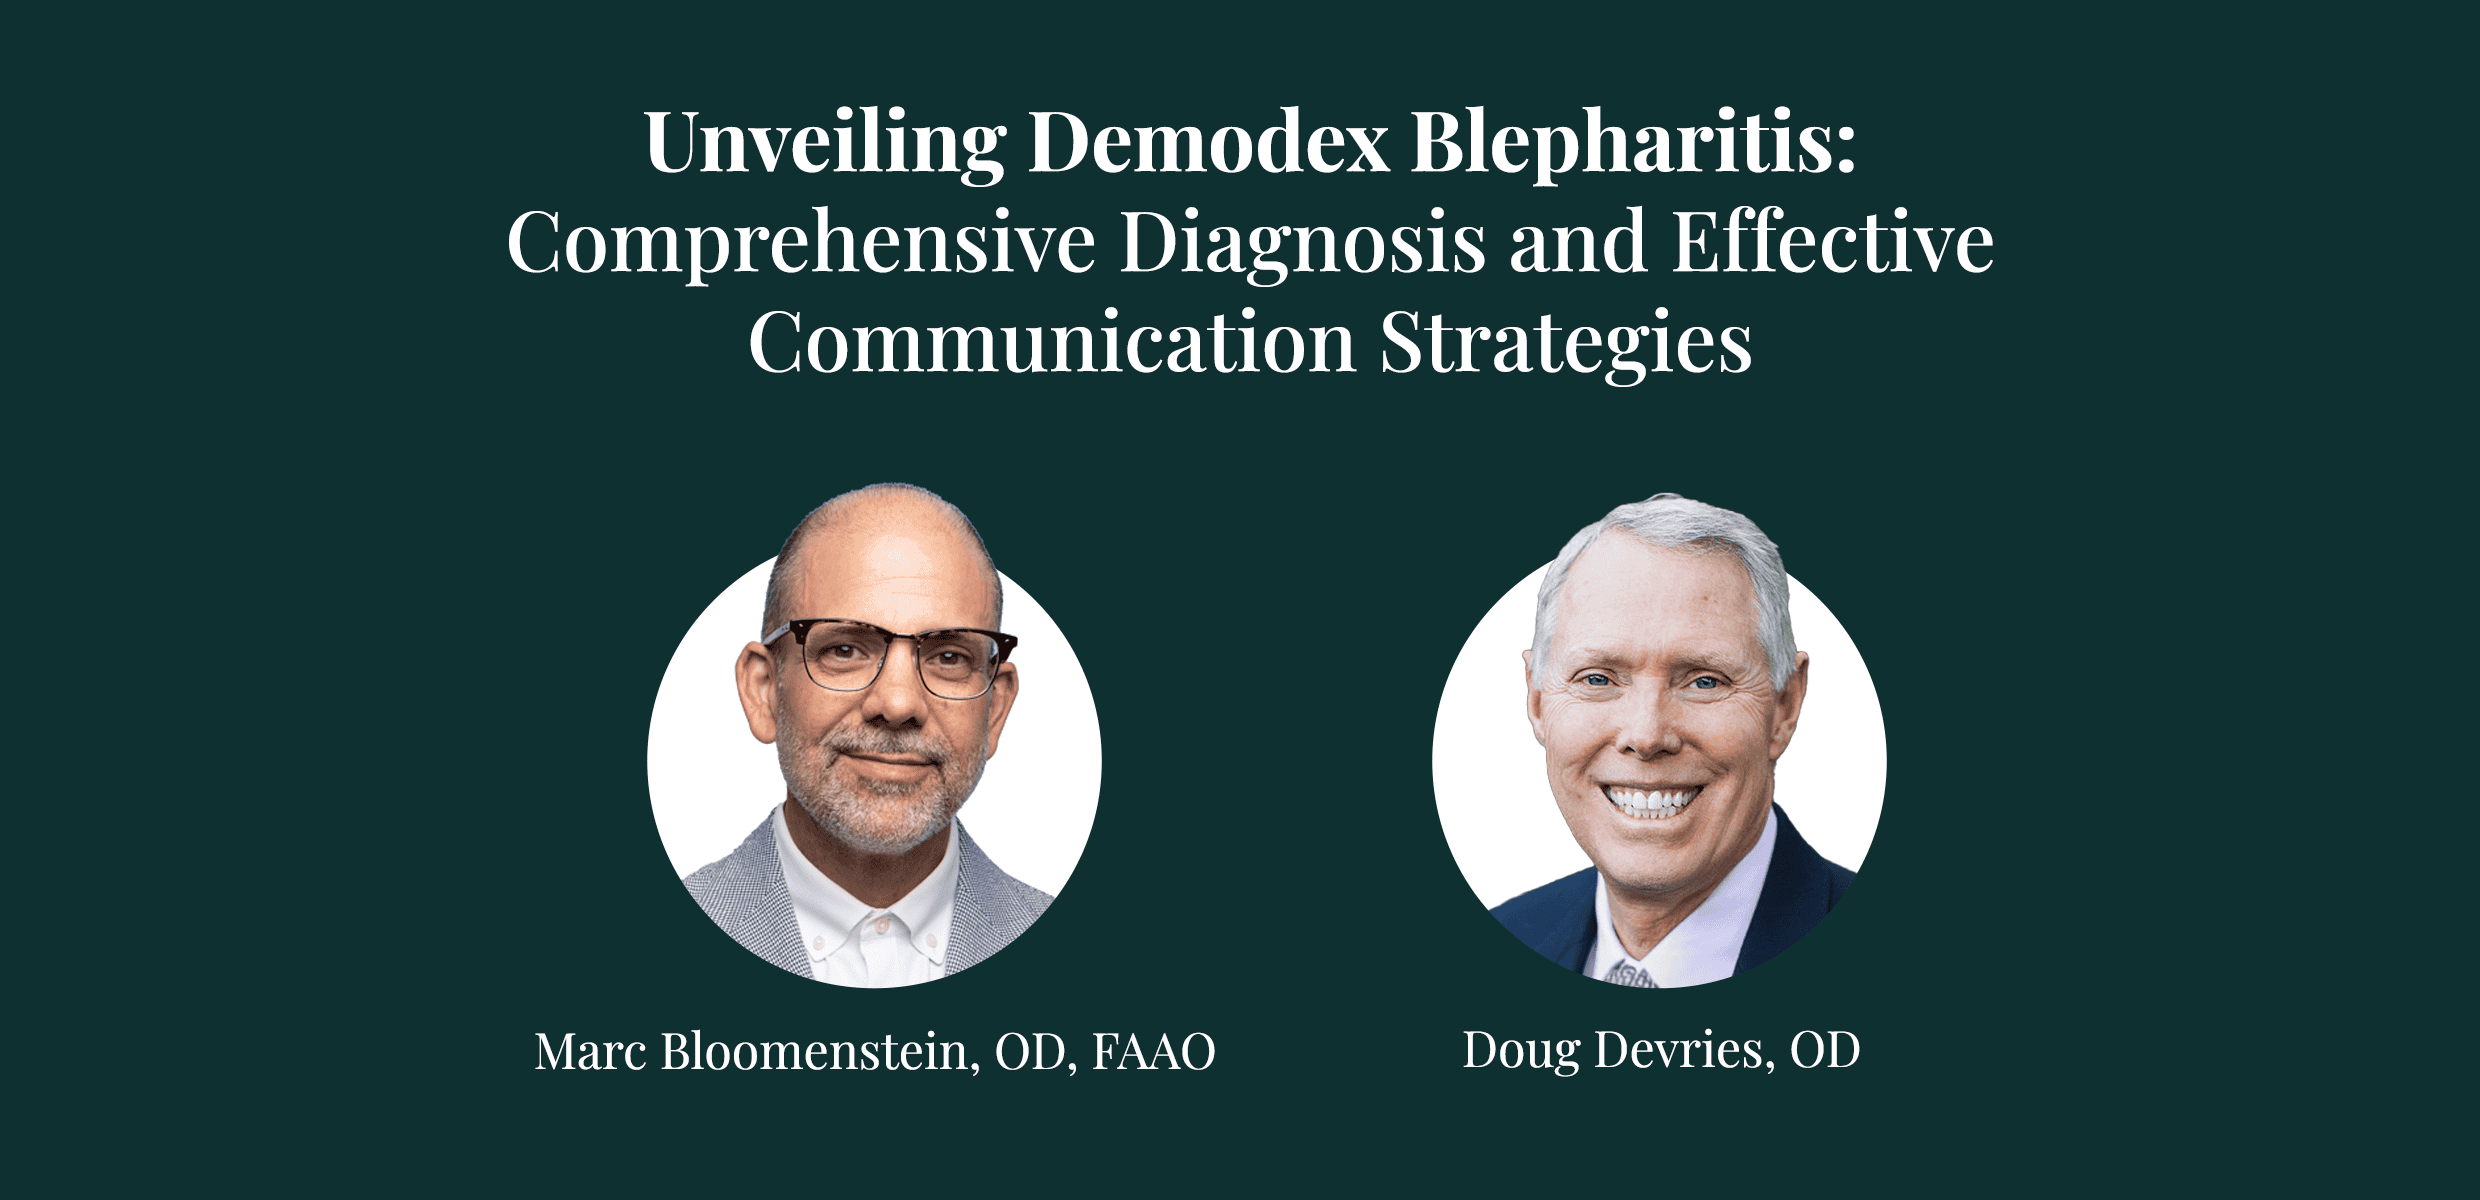 Unveiling Demodex Blepharitis: Comprehensive Diagnosis and Effective Communication Strategies